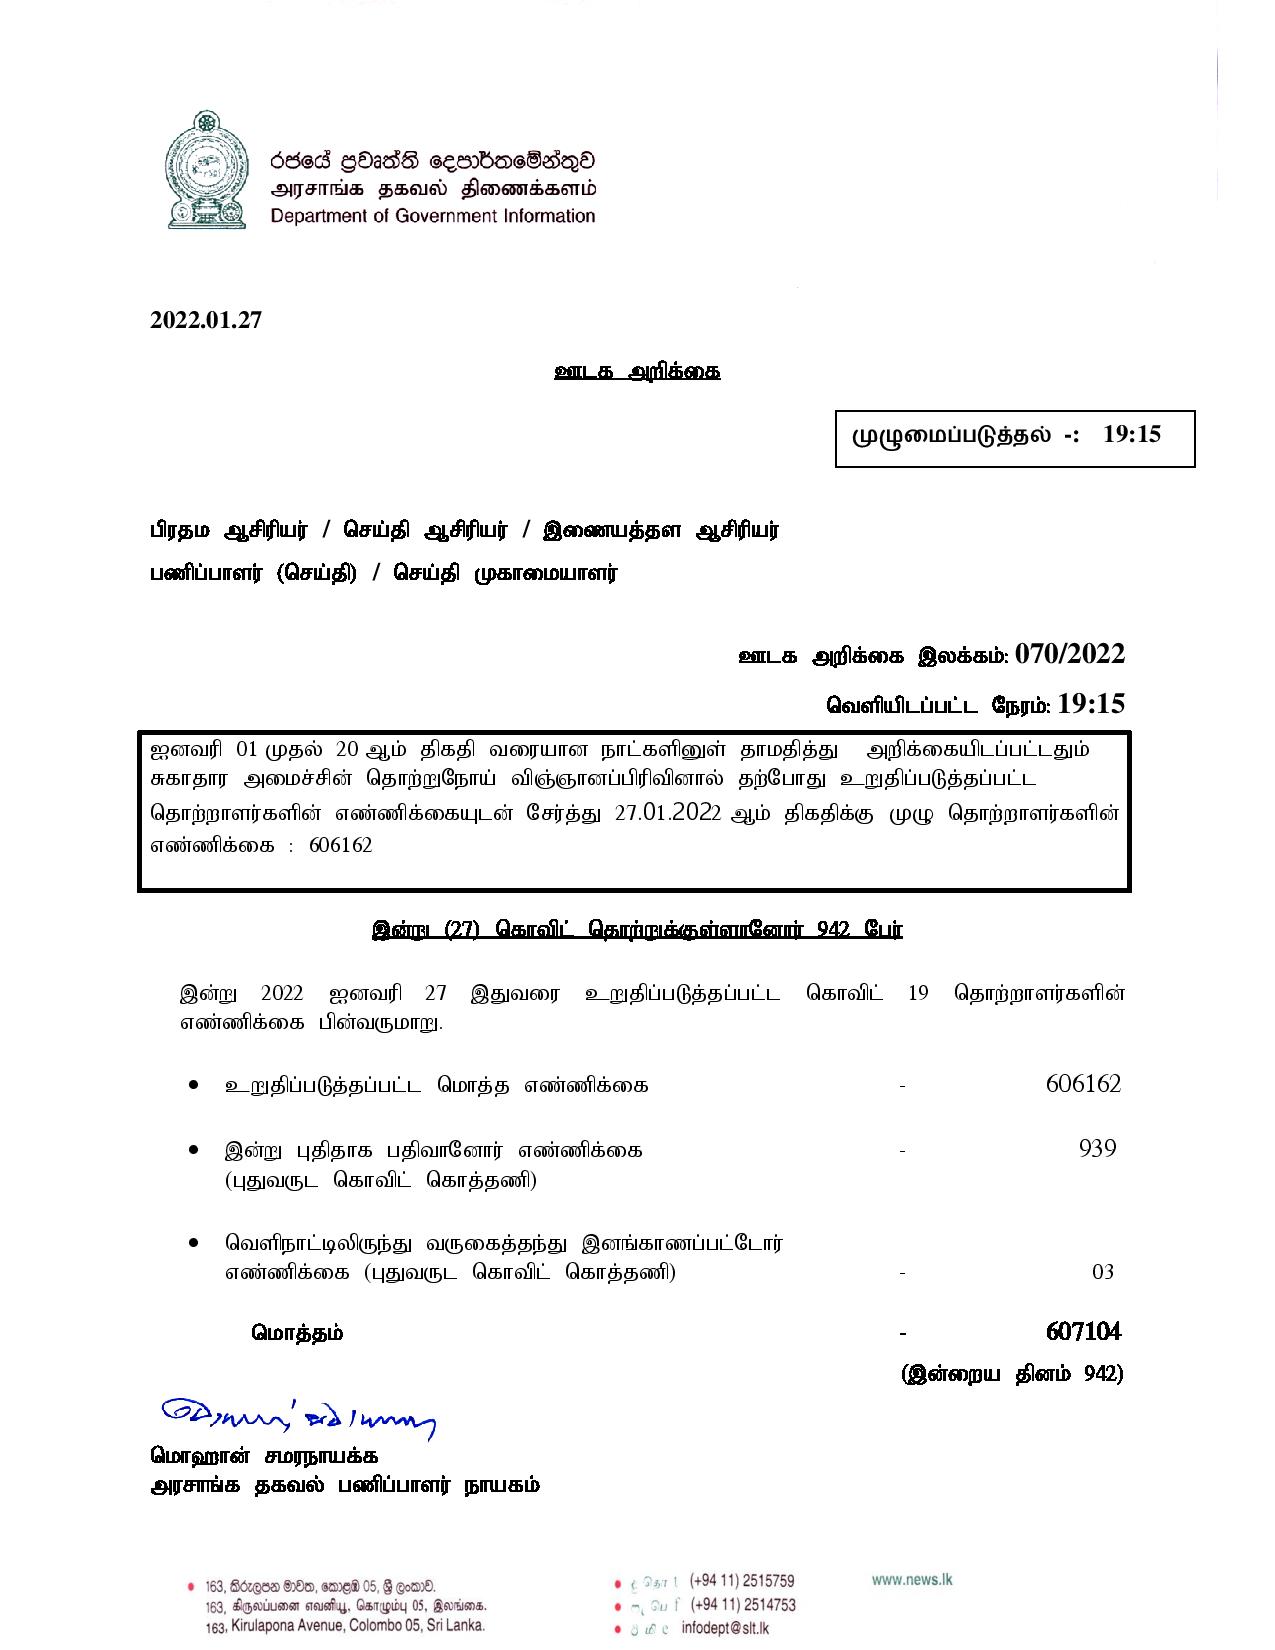 Press Release 70 Tamil page 001